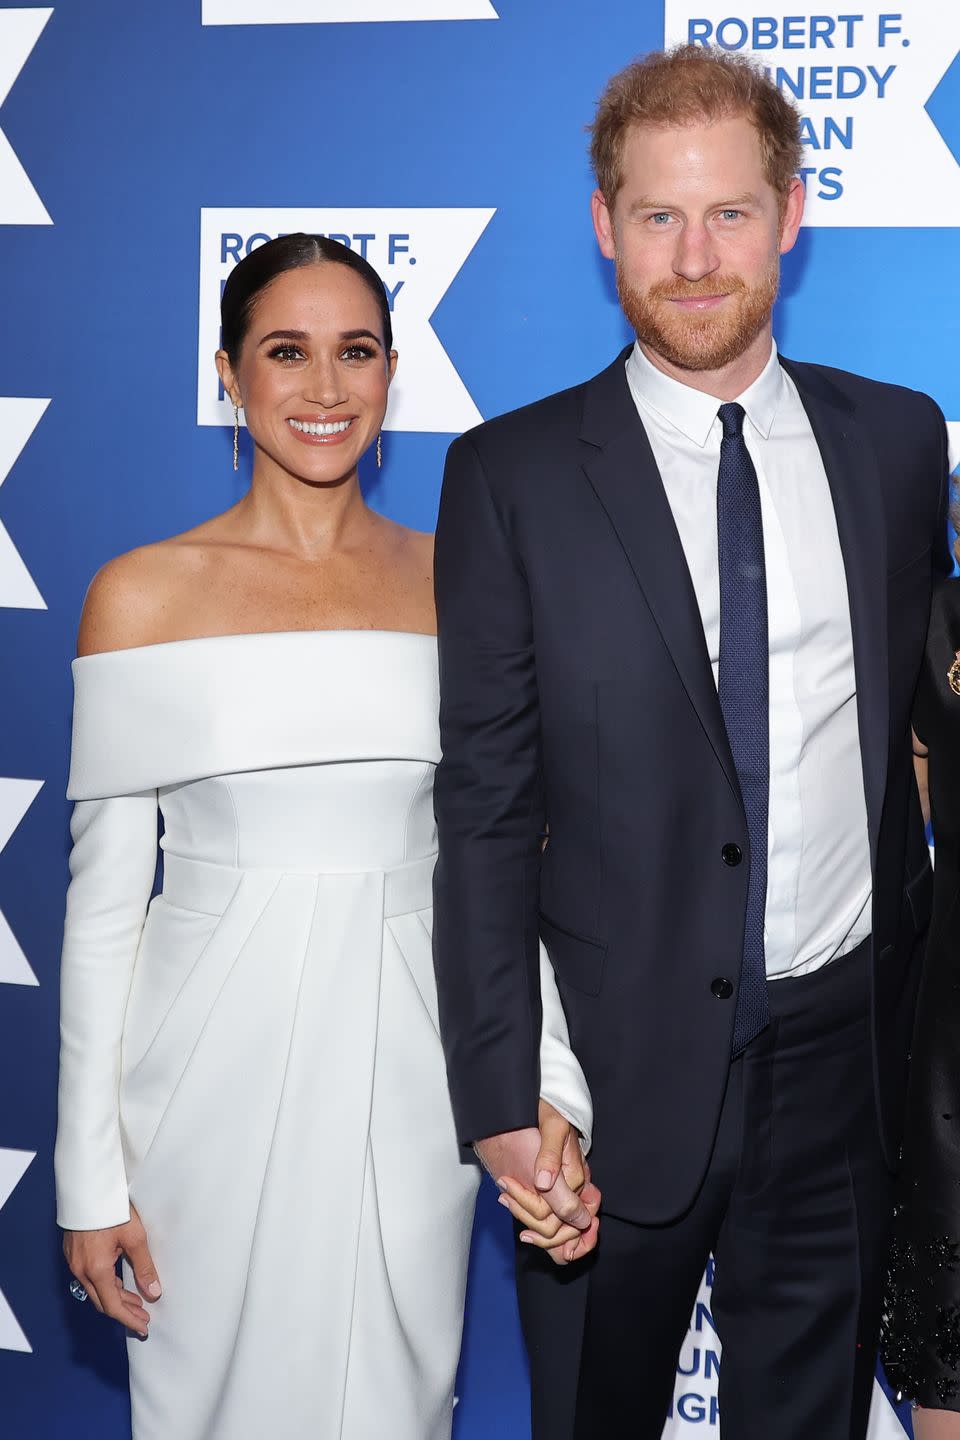 new york, new york   december 06  meghan, duchess of sussex and prince harry, duke of sussex attend the 2022 robert f kennedy human rights ripple of hope gala at new york hilton on december 06, 2022 in new york city photo by mike coppolagetty images for 2022 robert f kennedy human rights ripple of hope gala